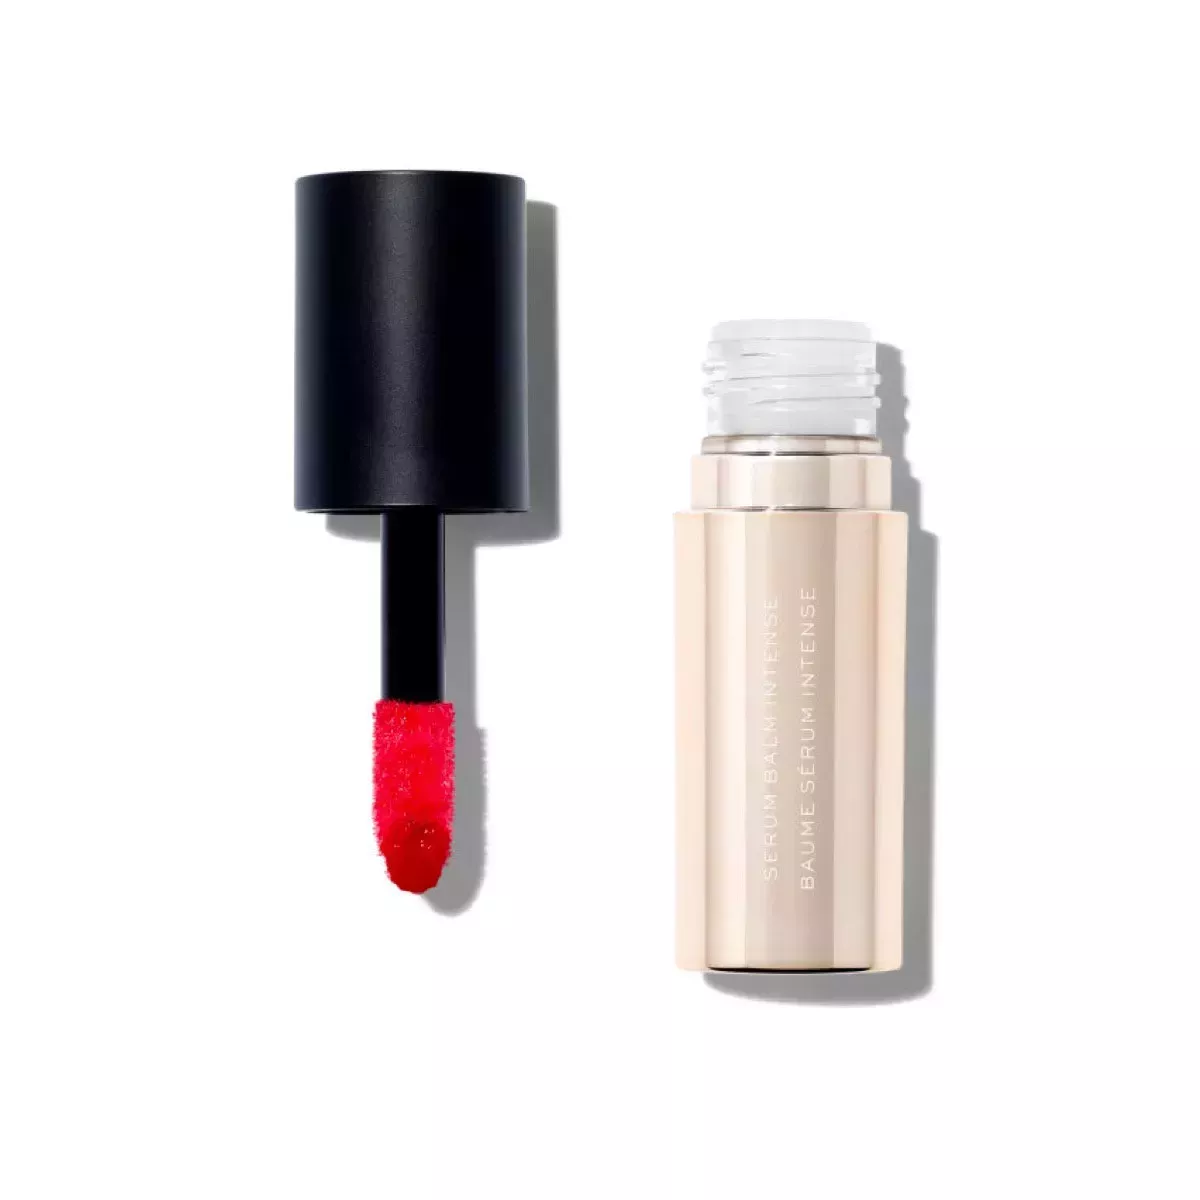 A gold and black lip gloss with a red tint